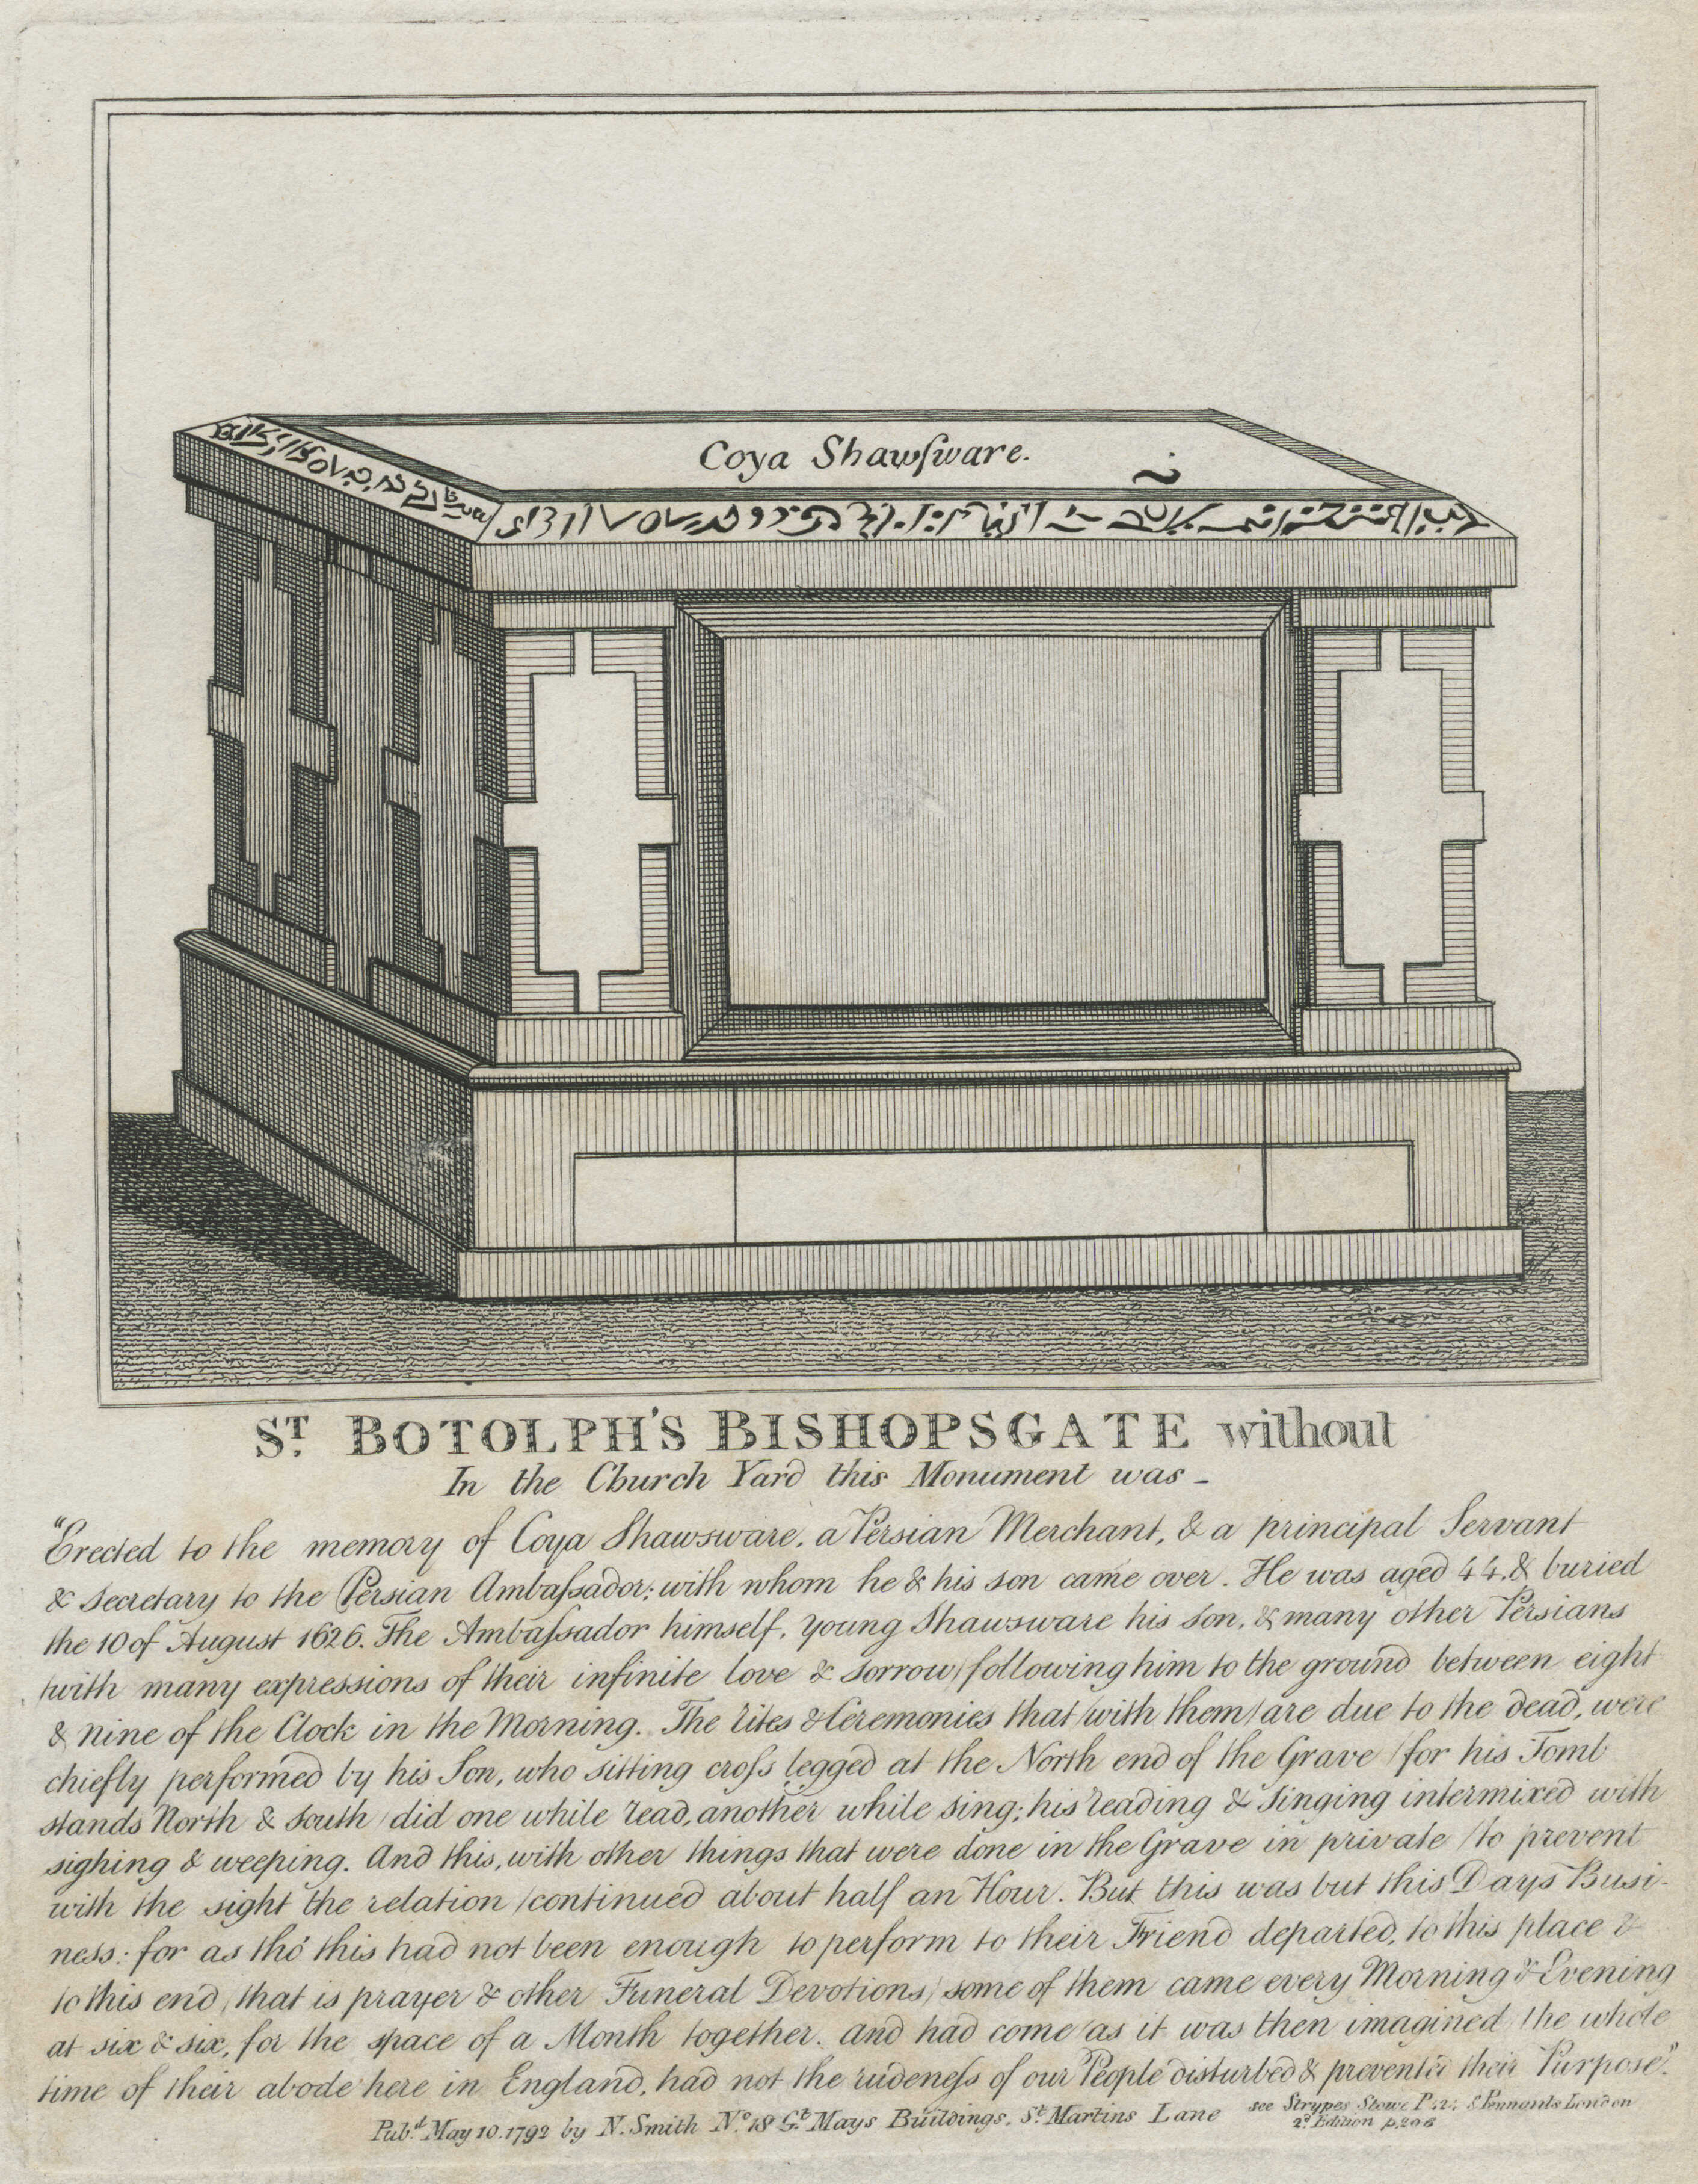 31-st-botolphs-bishopgsgate-without-monument-for-coya-shawsware